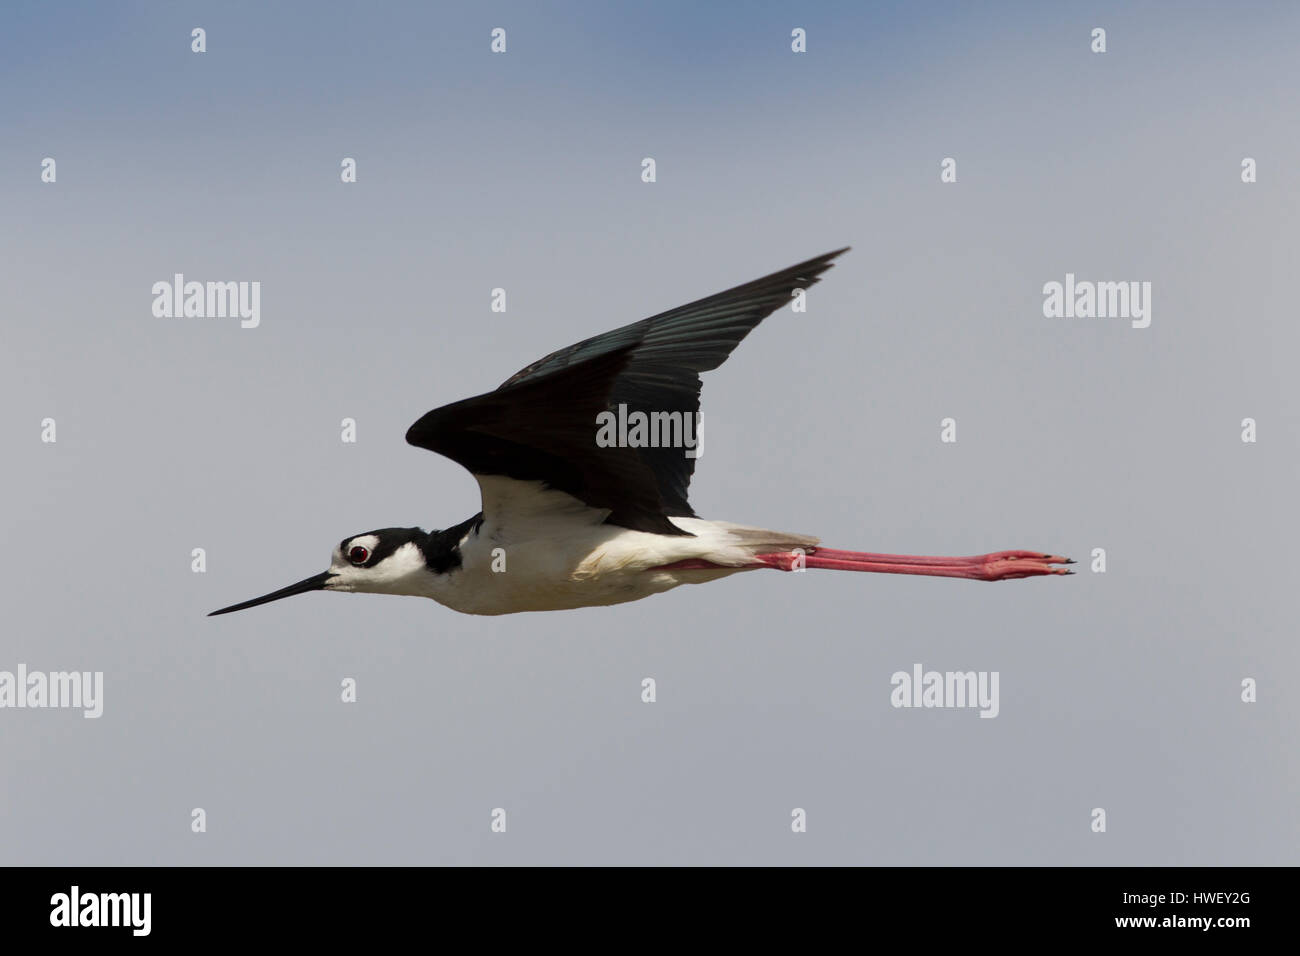 Flying black-necked stilt (Himantopus mexicanus) against a blue sky background. Elegant black and white pattern with long pink legs is unique to bird. Stock Photo